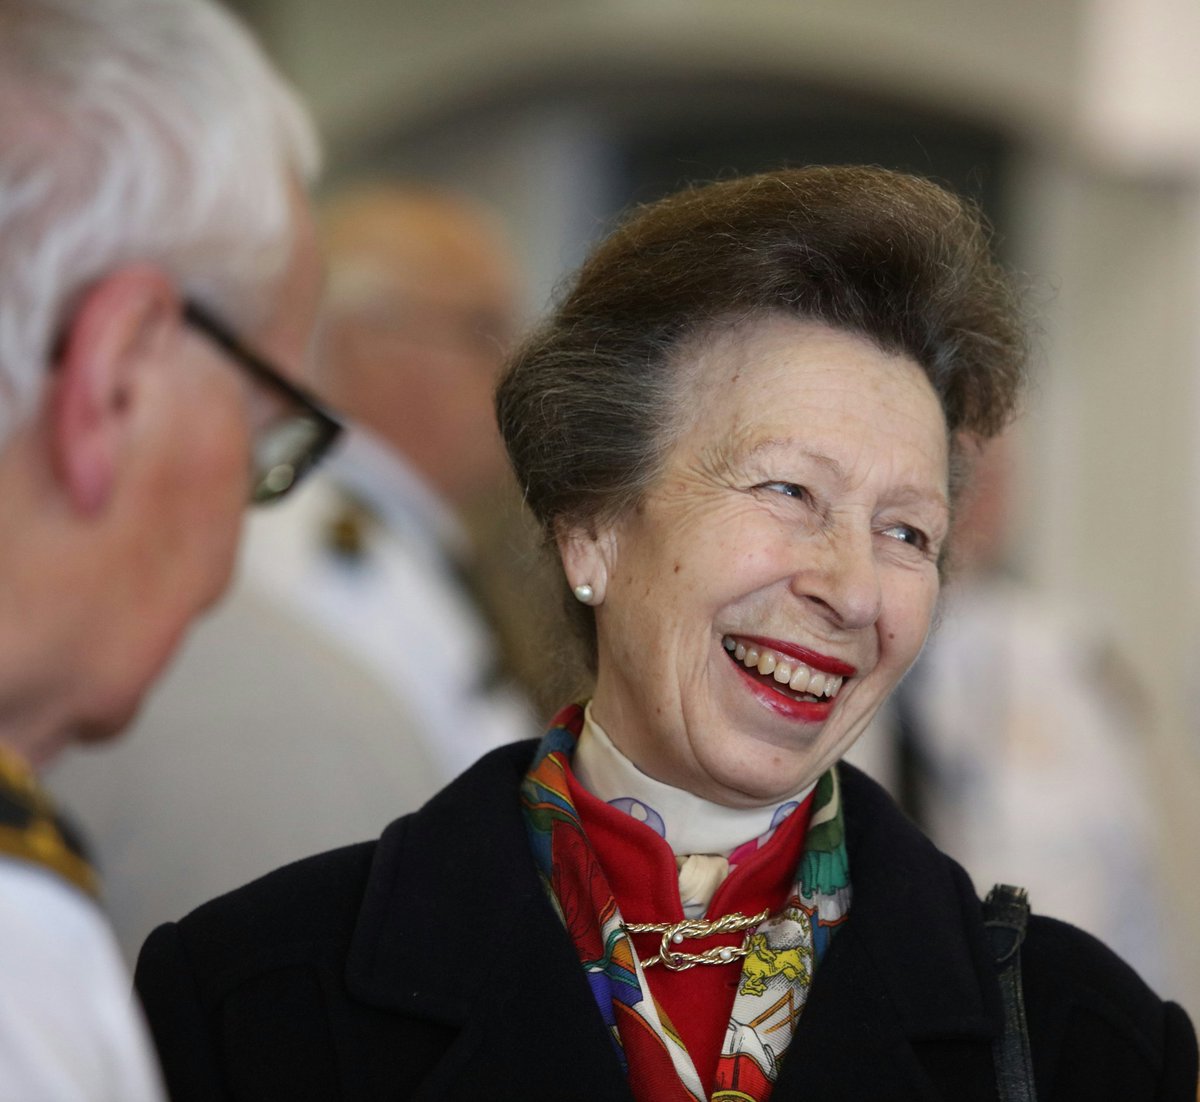 The Princess Royal warmly greeting volunteers from the National Coastwatch Institute.

#RoyalFamily
#PrincessRoyal
#PrincessAnne